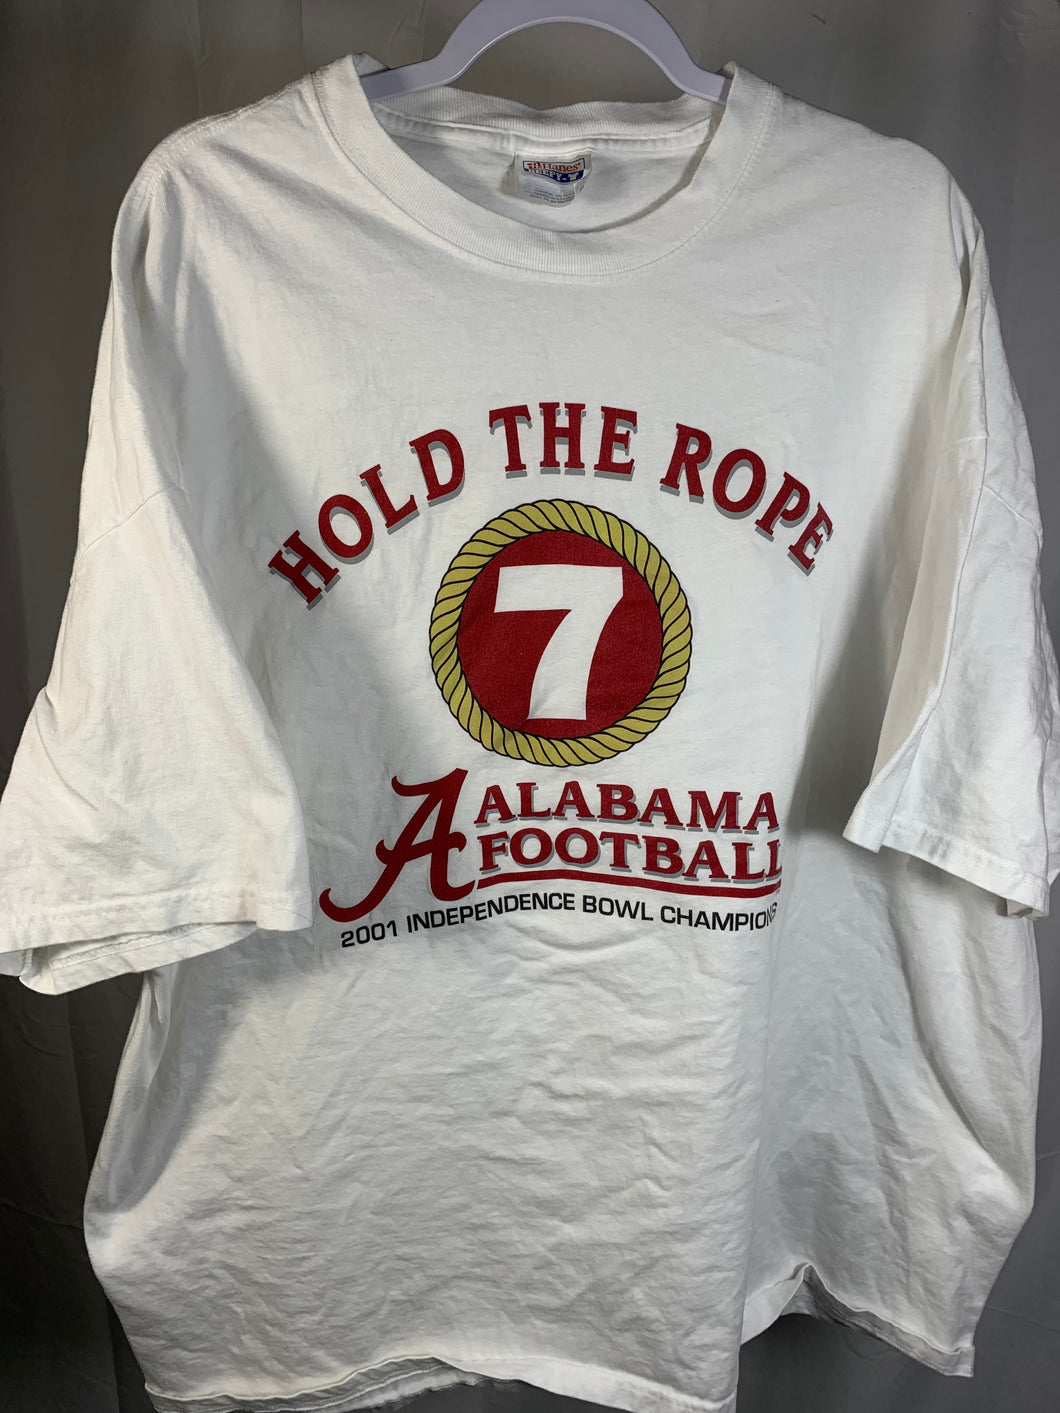 Vintage Alabama Football Hold The Rope T-Shirt 2XL